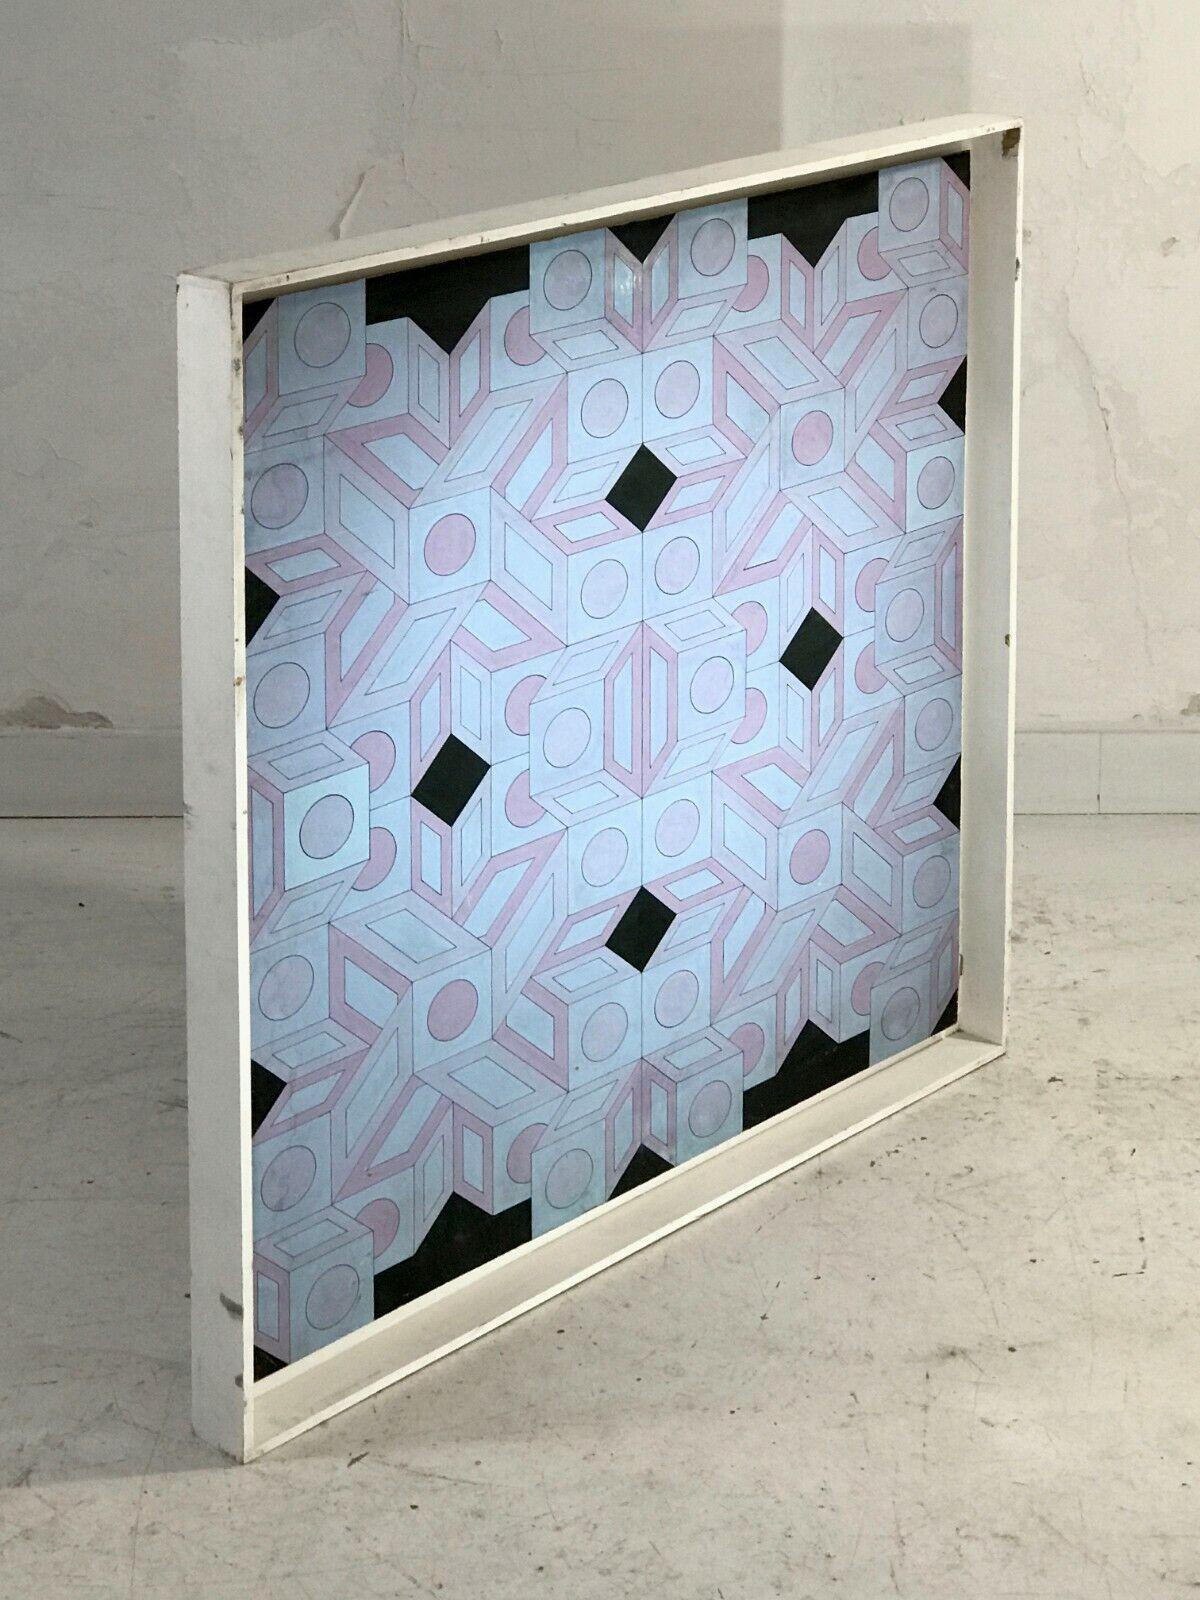 An Op-Art acrylic on a wooden panel painting, pop, abstract, op-art, a composition of geometrical forms in blue, violet and black on a wooden panel cast in its original shadow box (